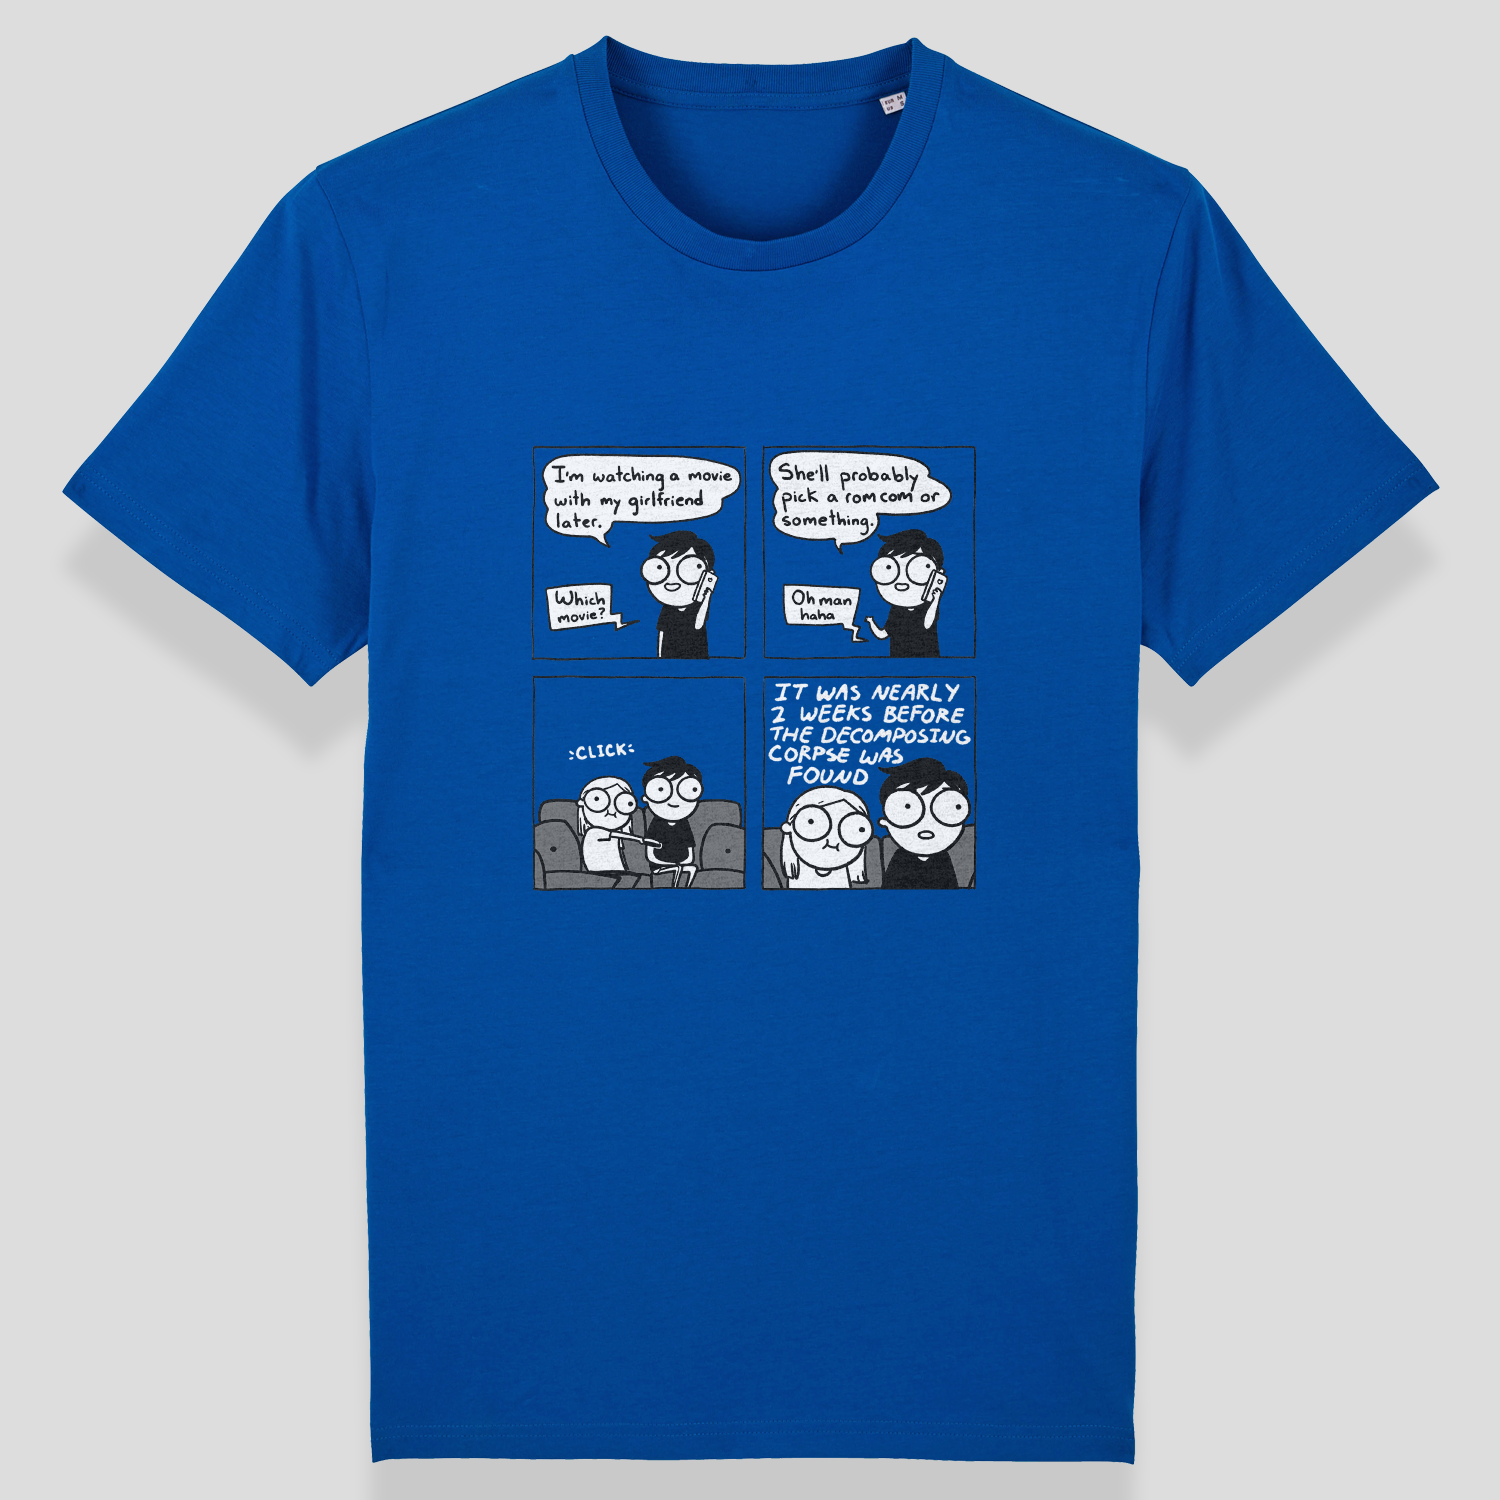 "I'M Watching A Movie With My Girlfriend" T-Shirt